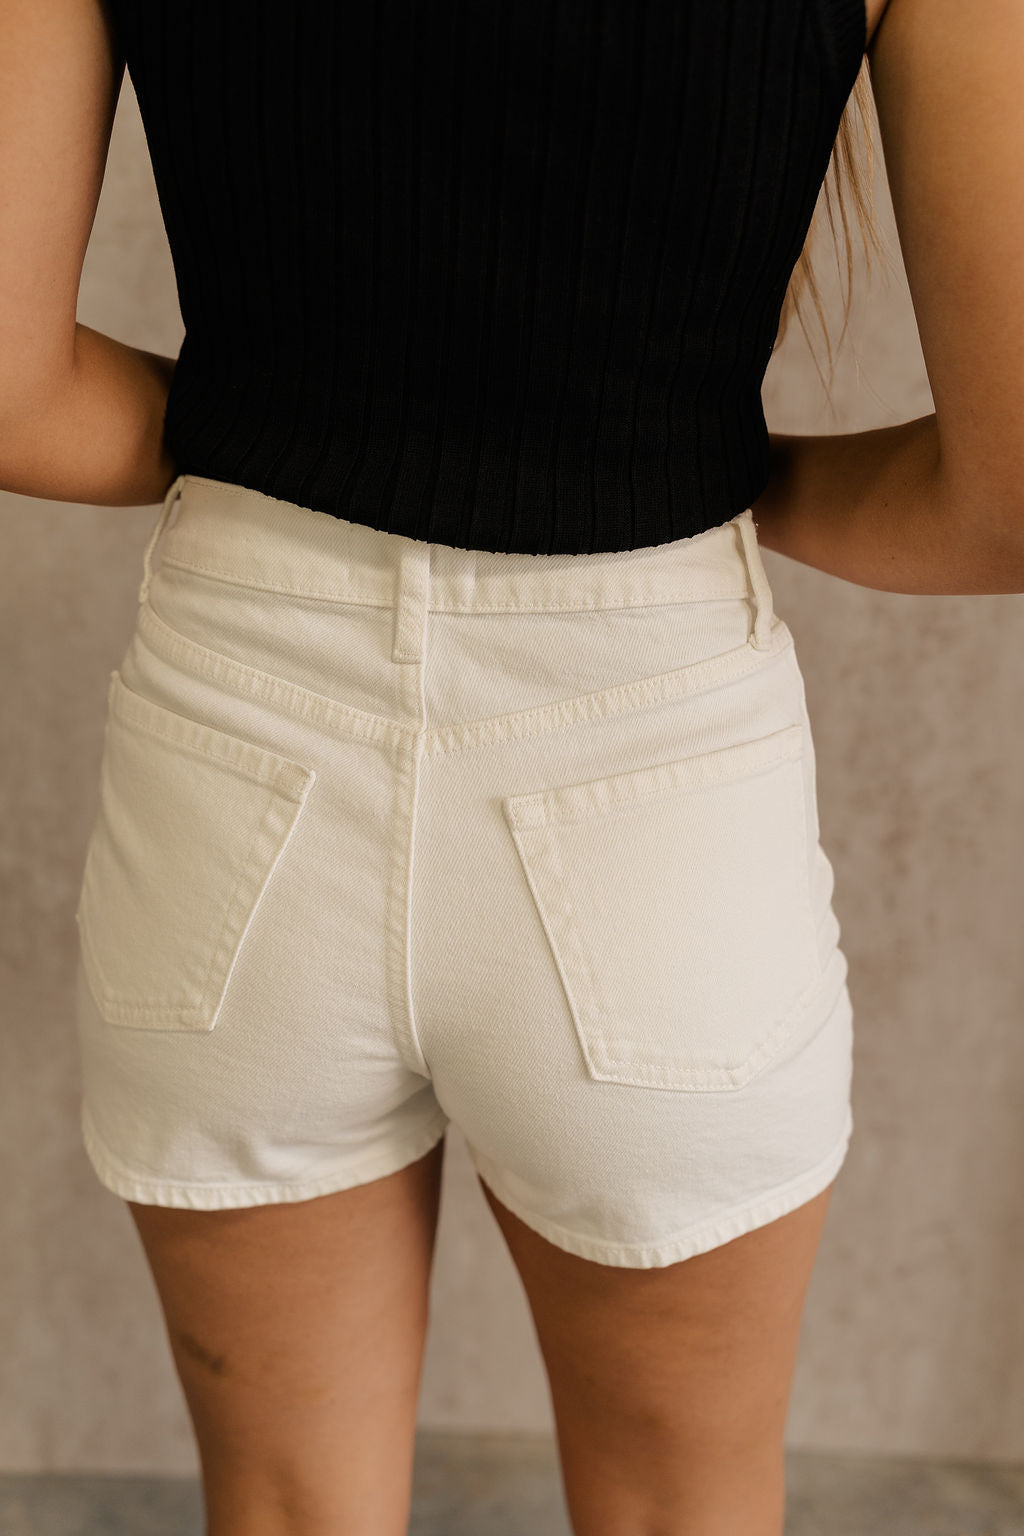 Back view of female model wearing the Andi White Denim Shorts that have white denim fabric, a button fly with silver buttons, belt loops, and front and back pockets. Worn with black tank.